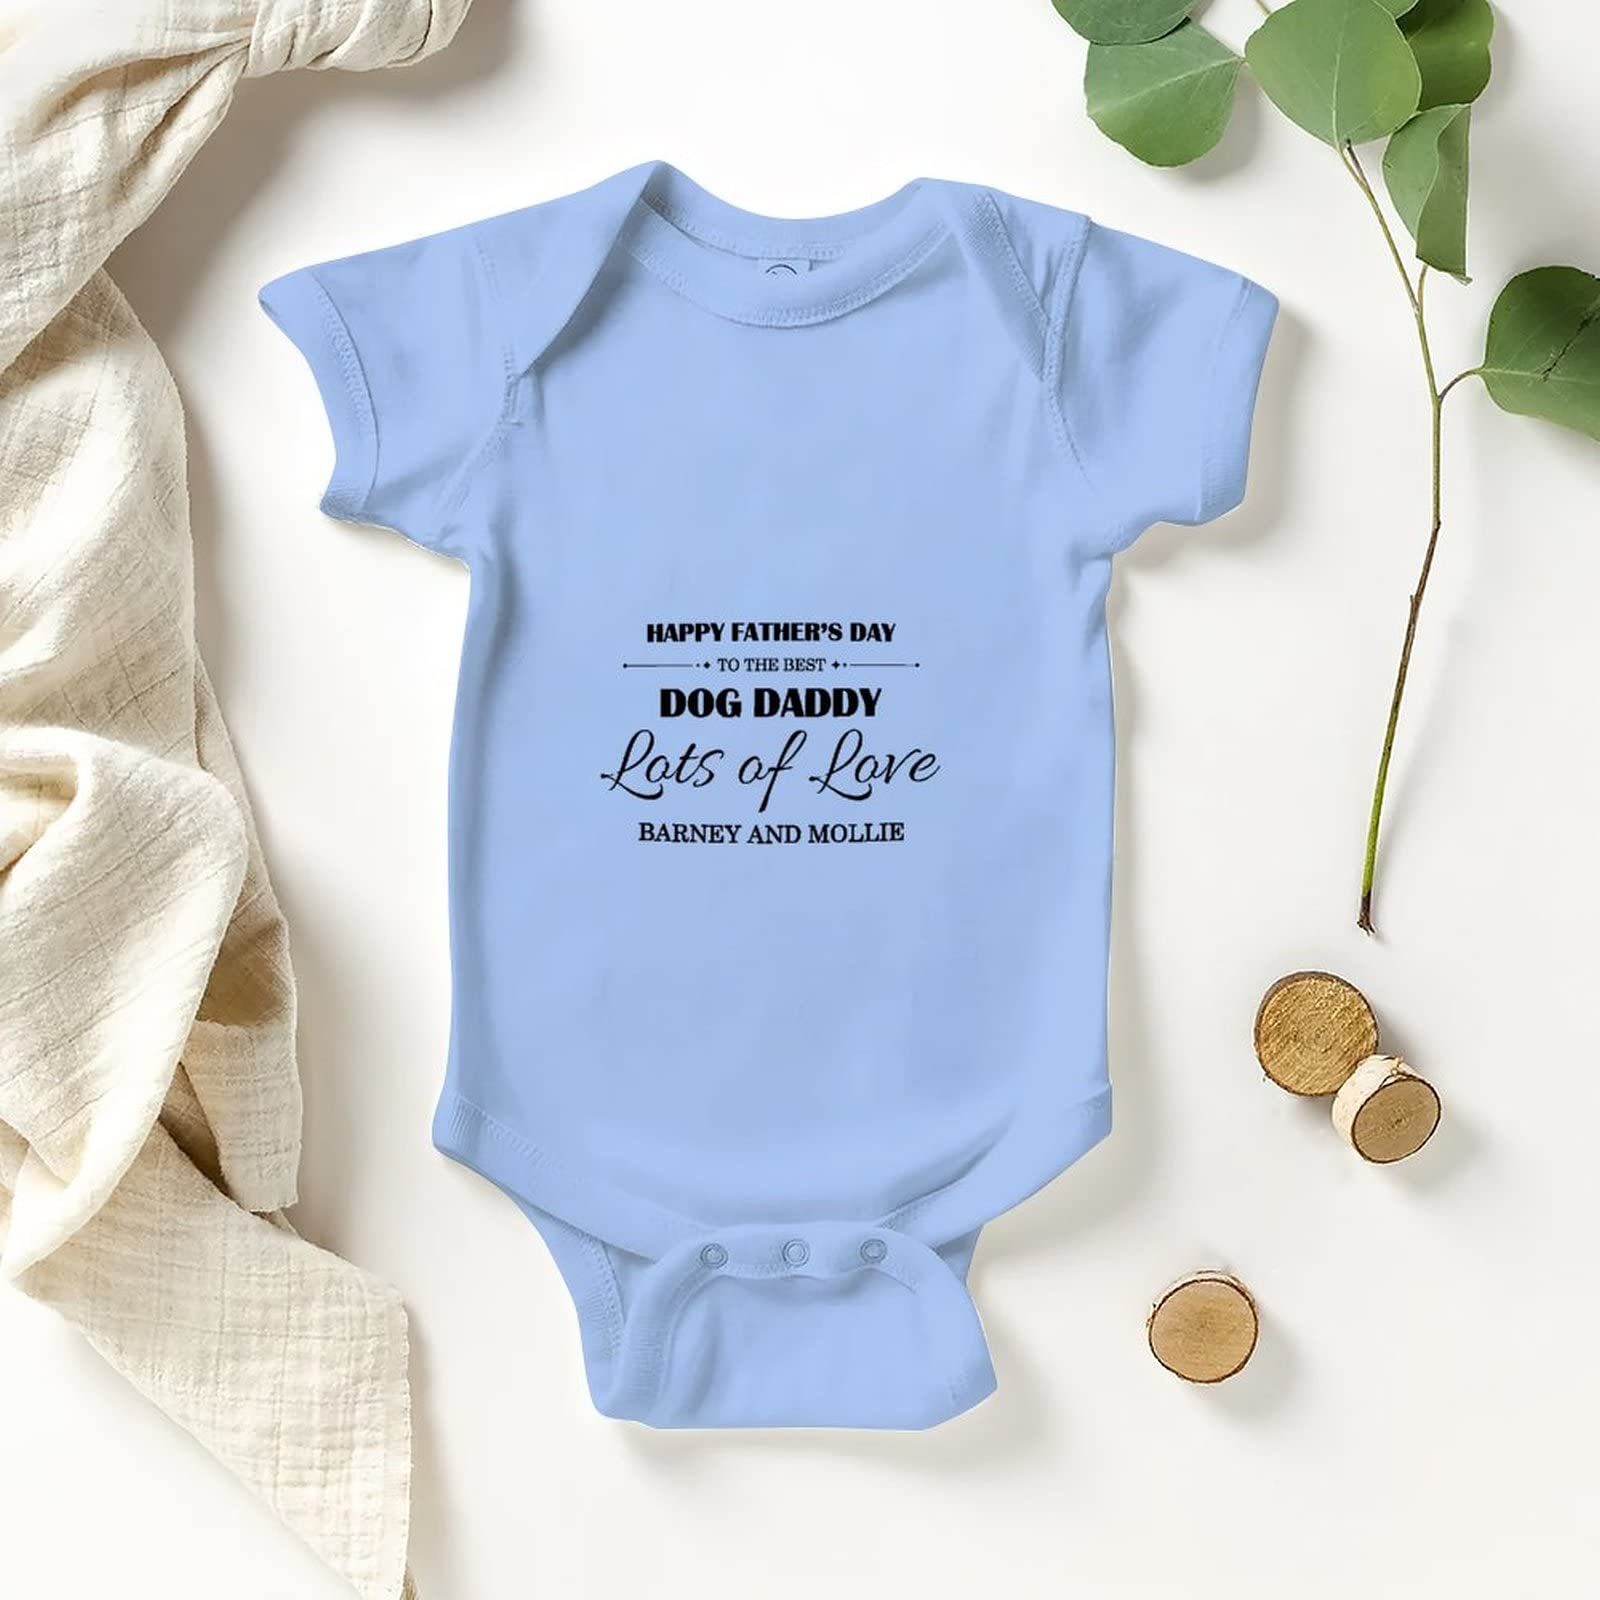 Baby Bodysuits Cotton Comfort Sleep And Play For Newborns and Infants Toddler Infant One-Piece Short-Sleeve New Dad Gifts